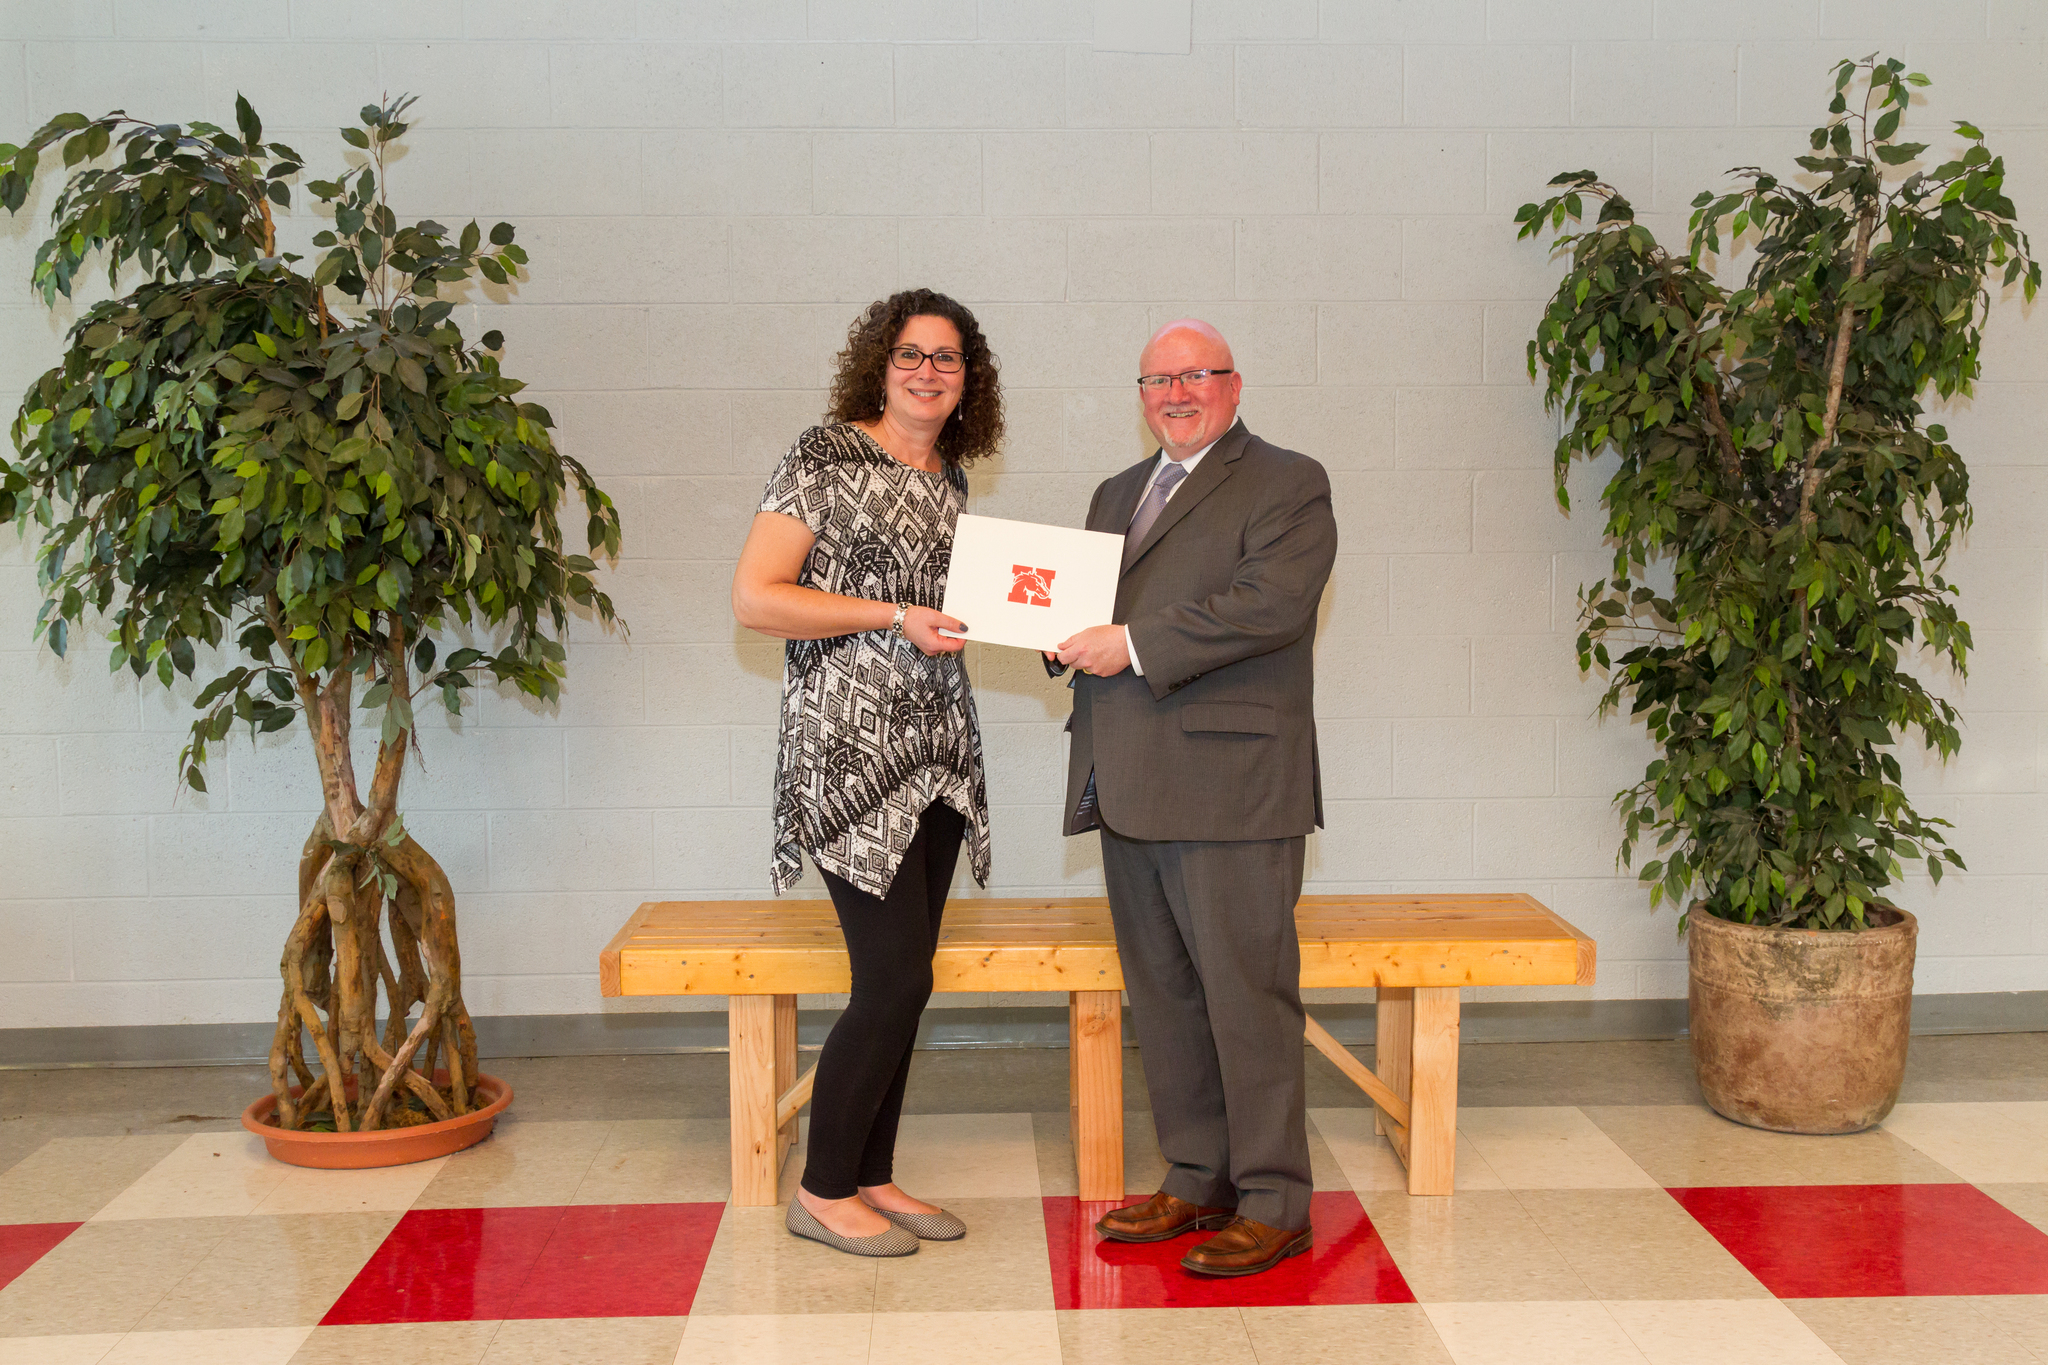 Mrs. Postma and the Board President holding award